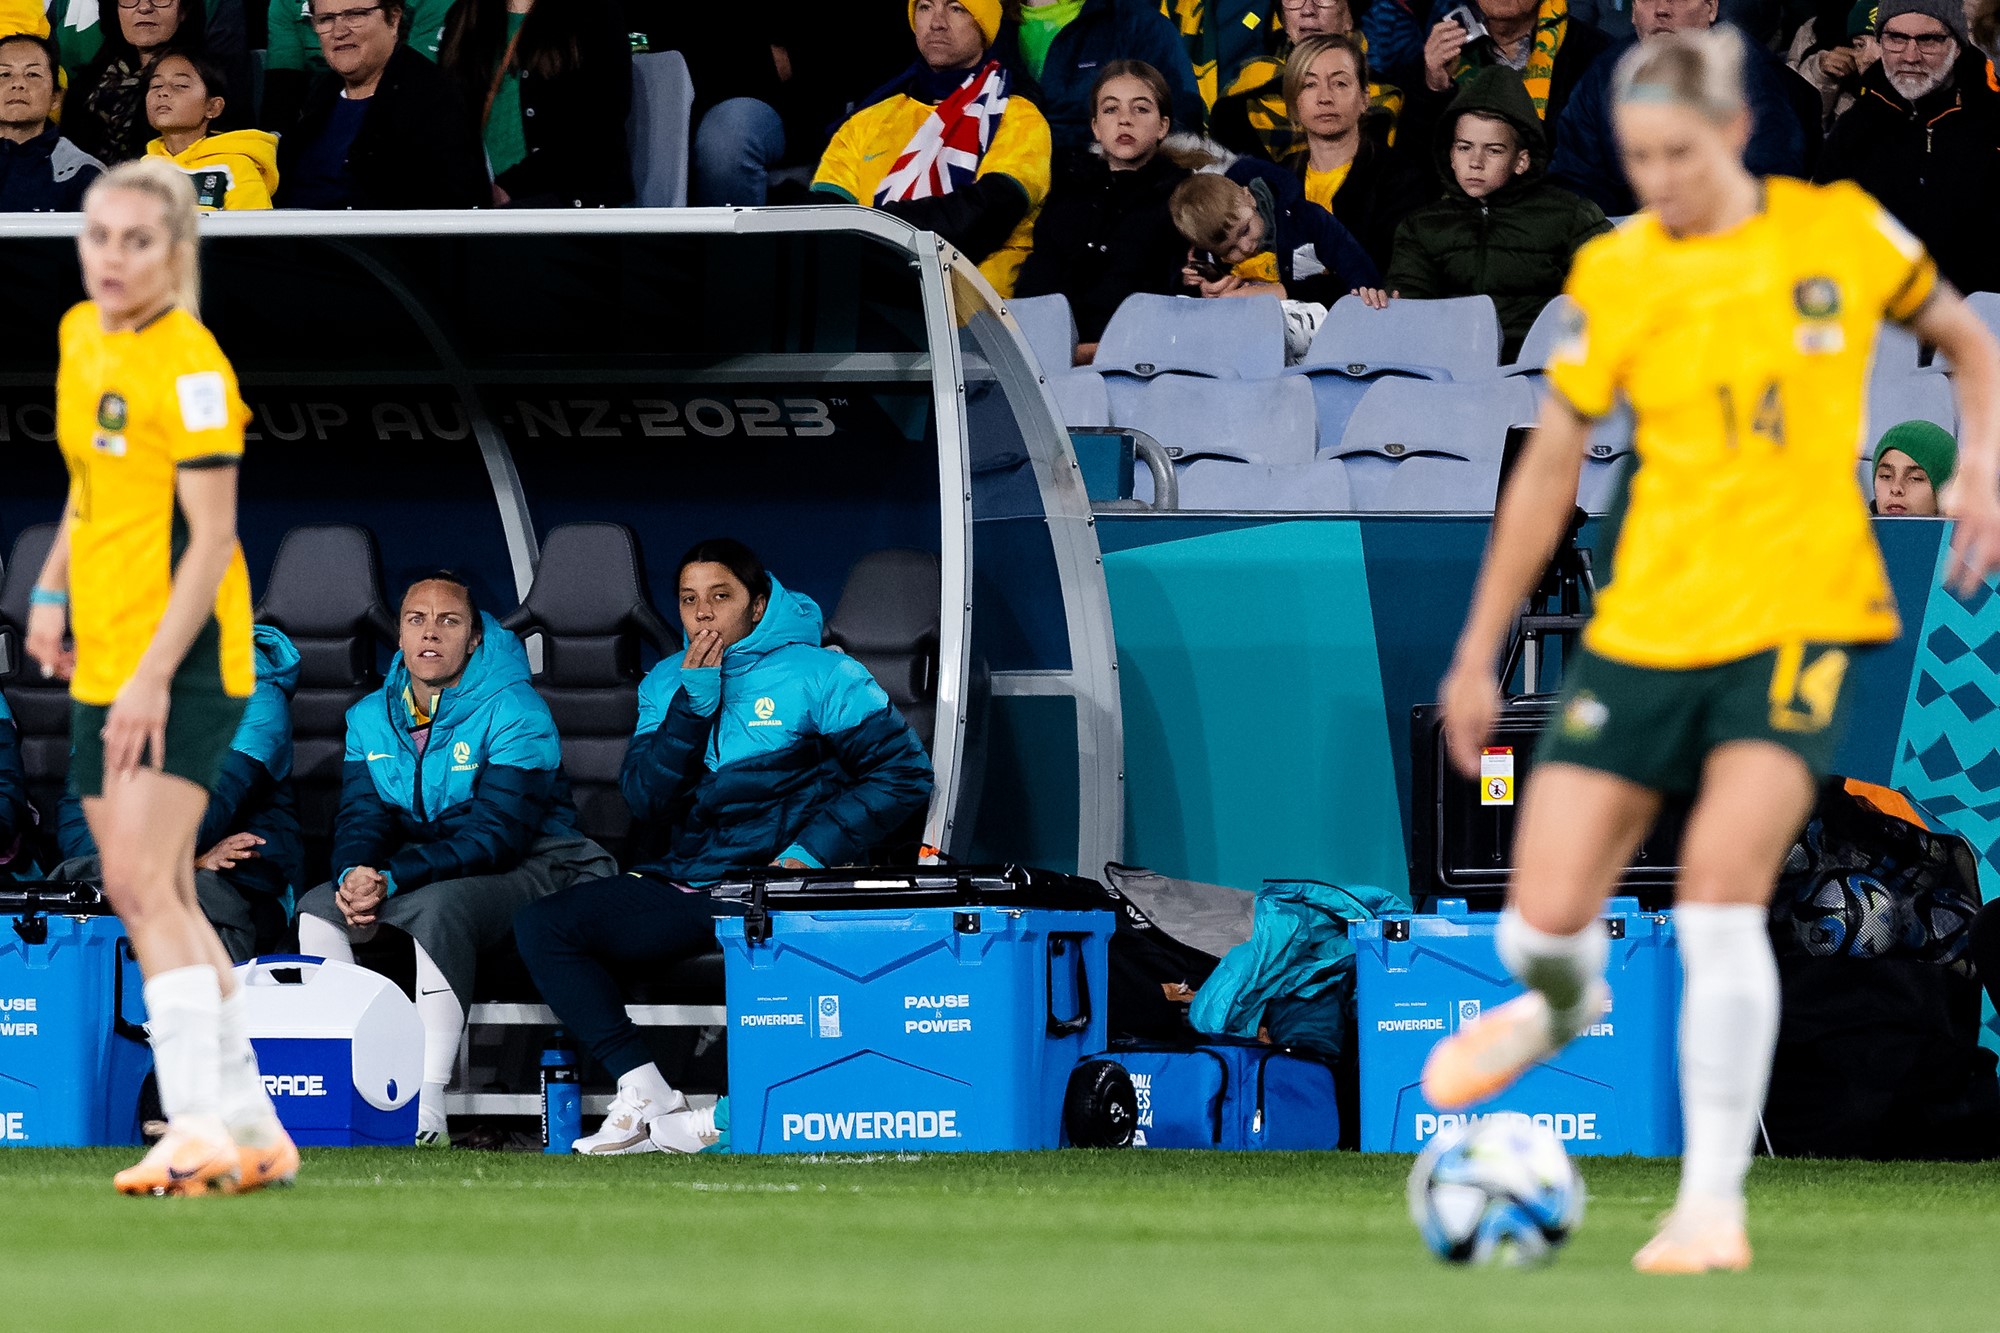 Sam Kerr watches from the bench as the Matildas play.